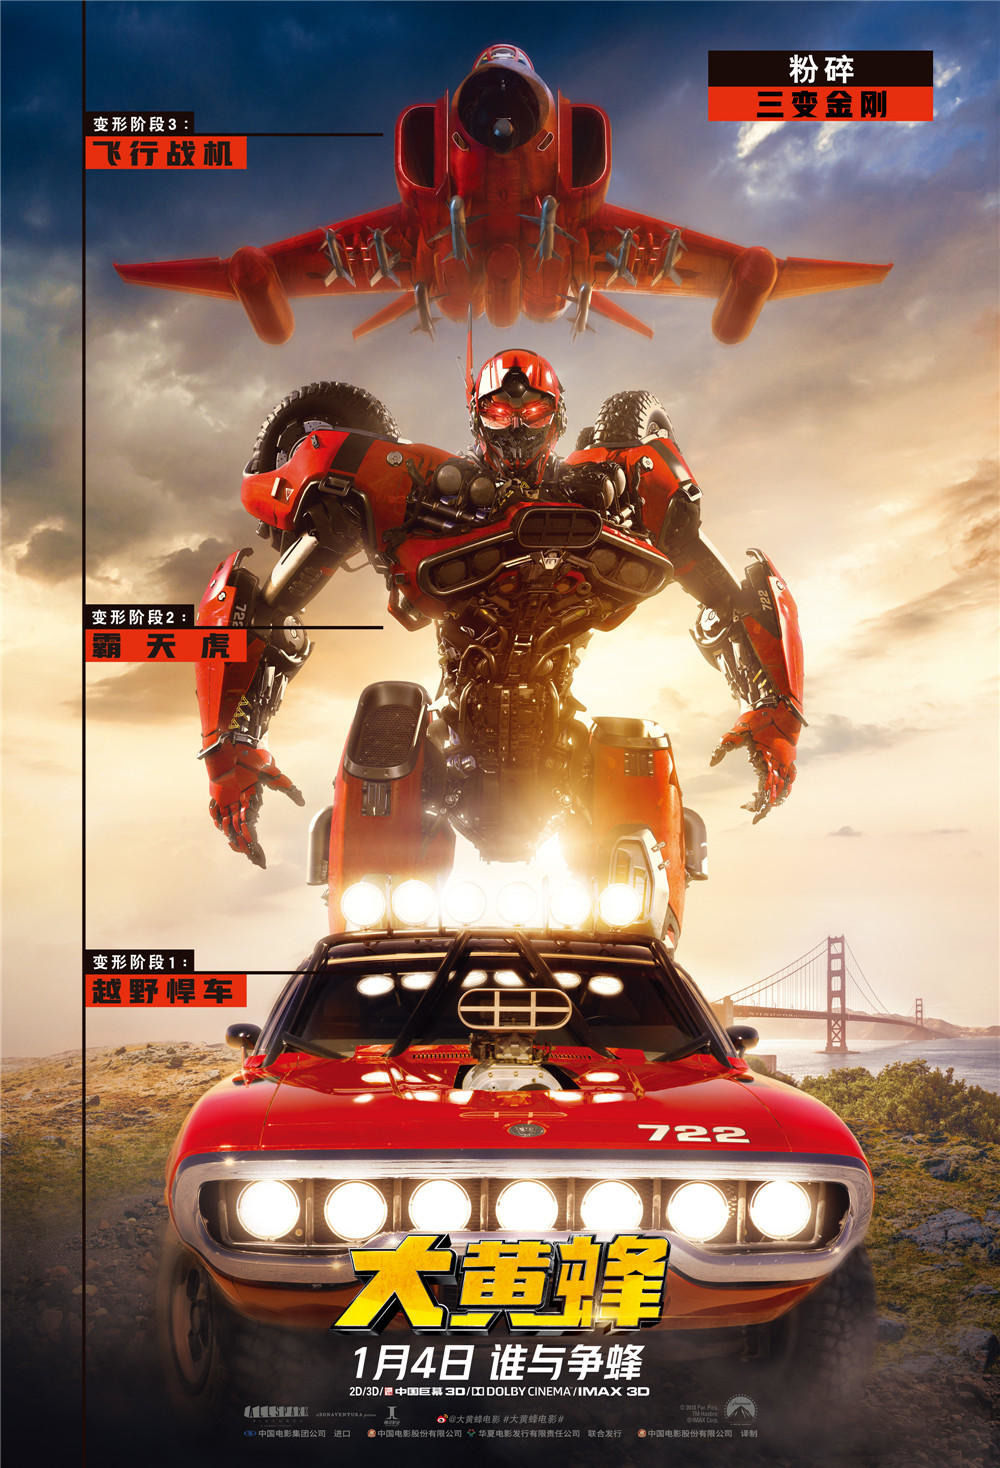 Extra Large Movie Poster Image for Bumblebee (#13 of 21)